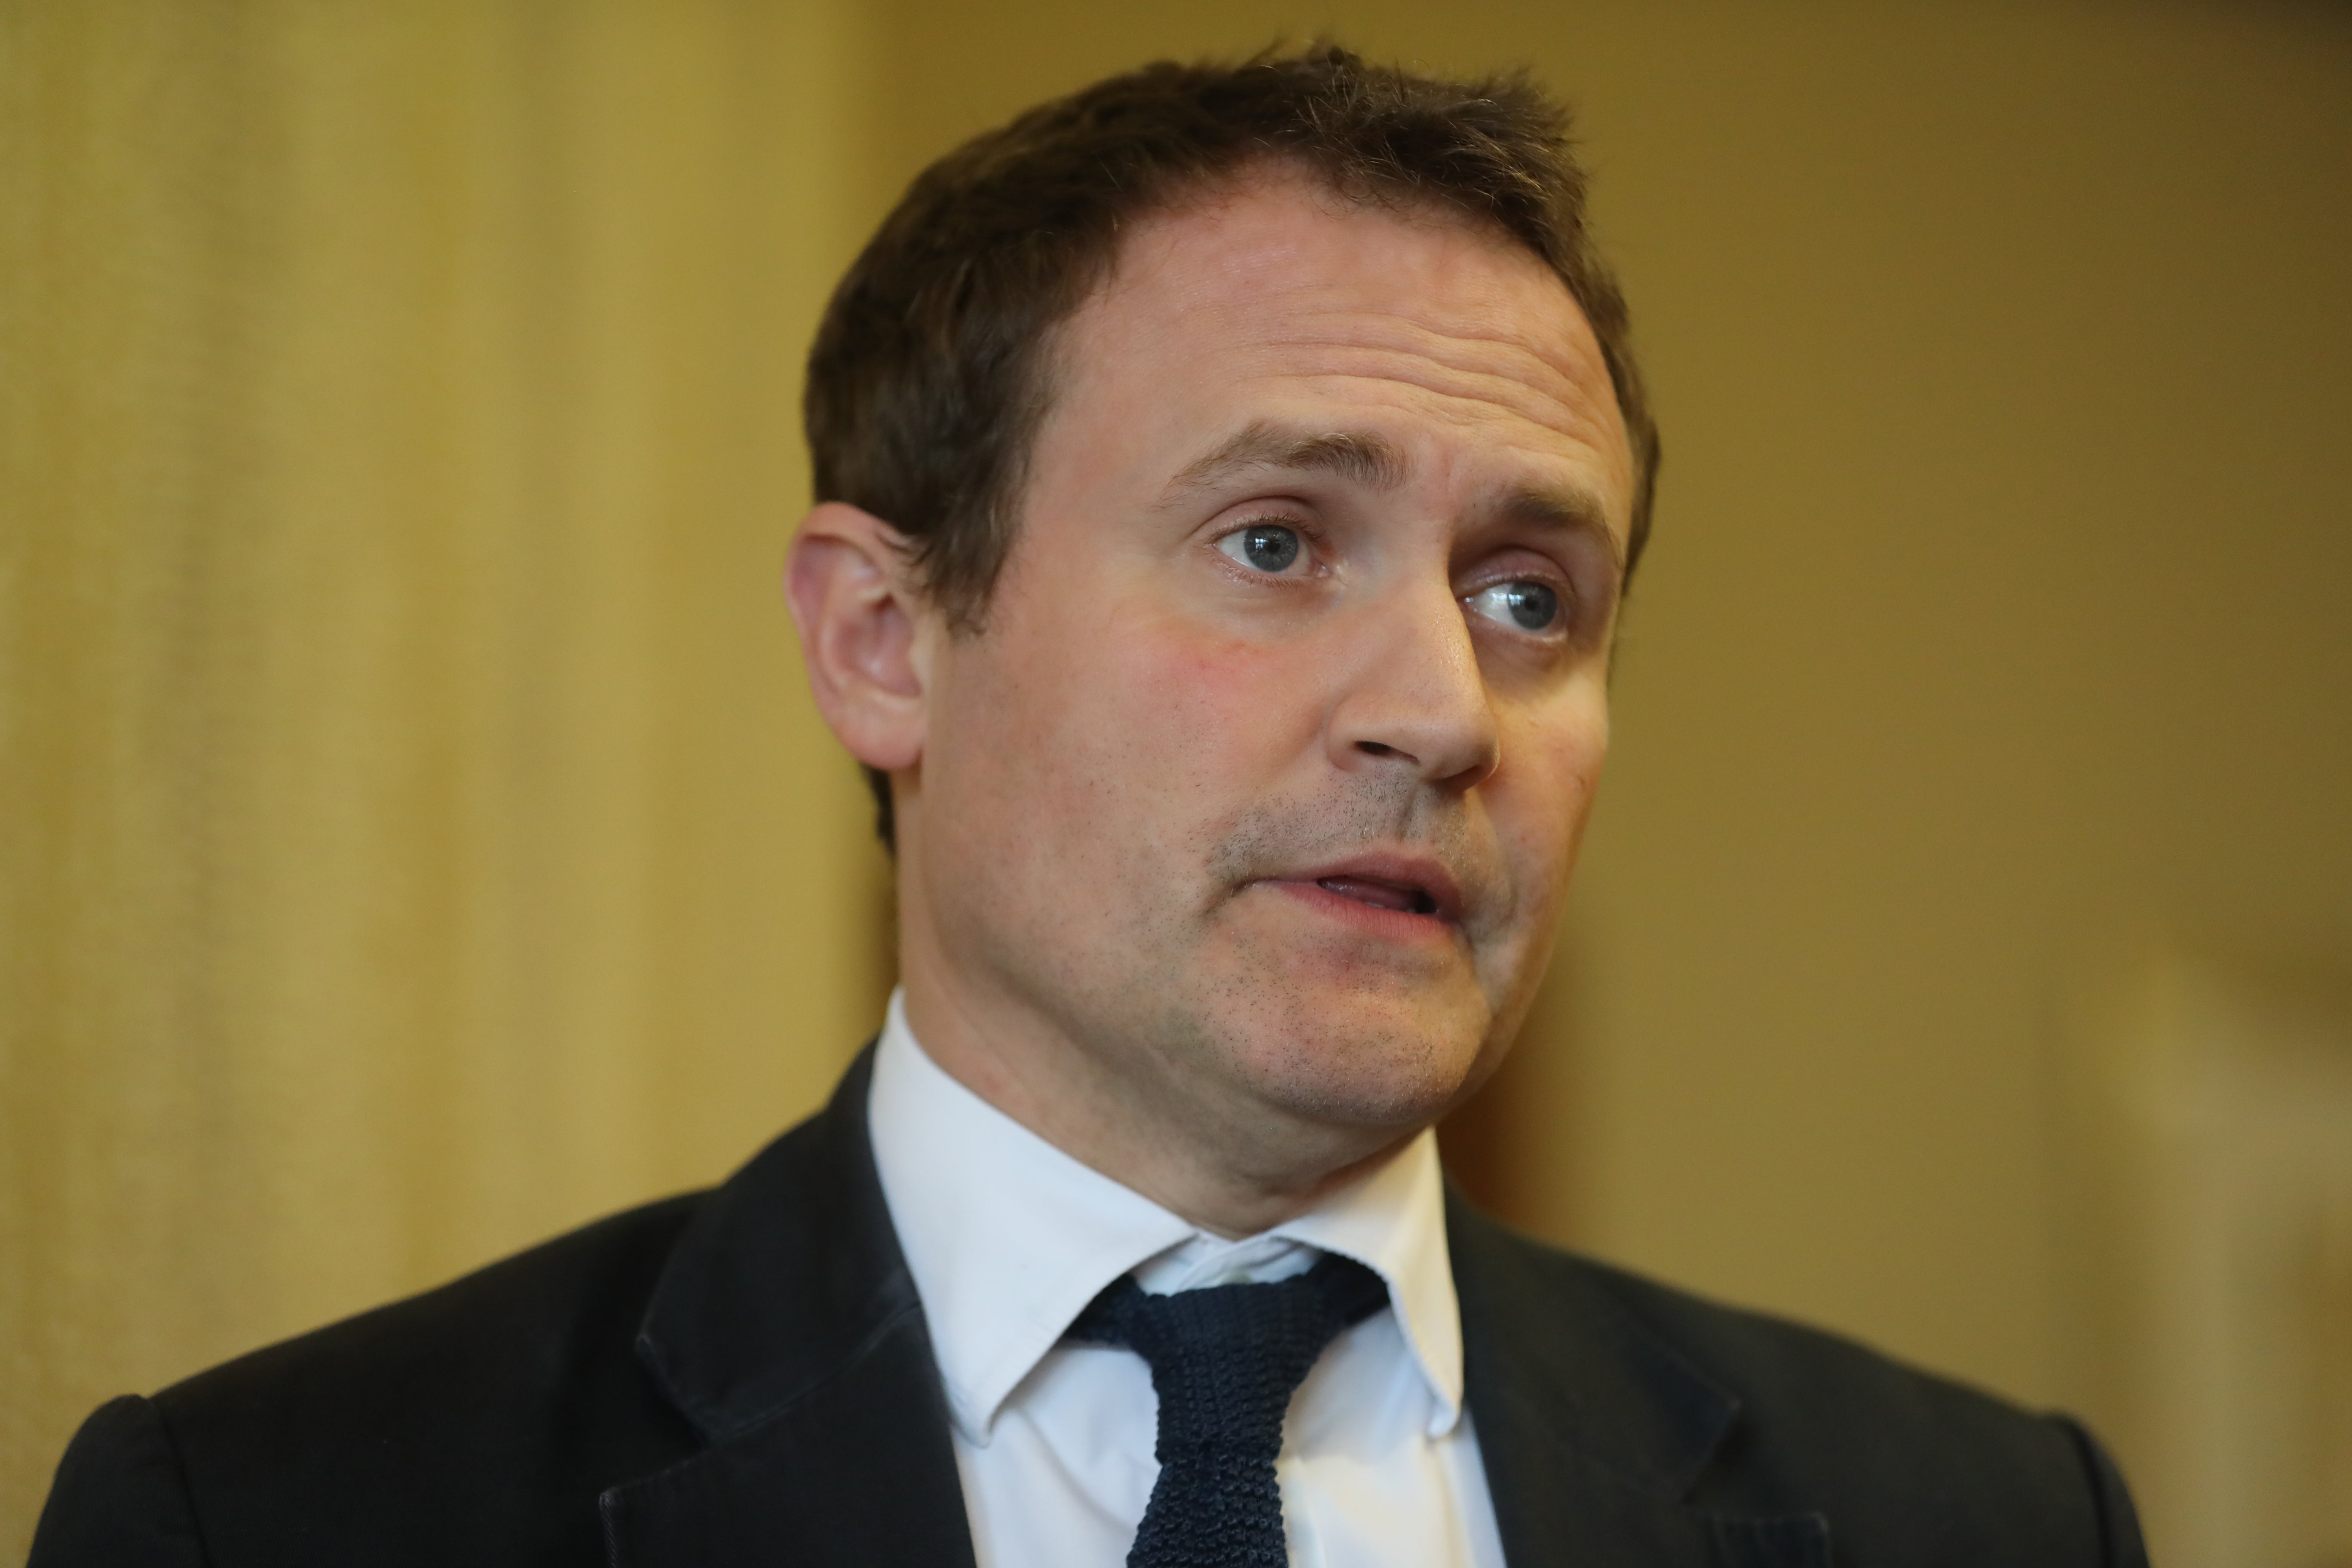 Tom Tugendhat hoped to pick up more support as the field narrowed